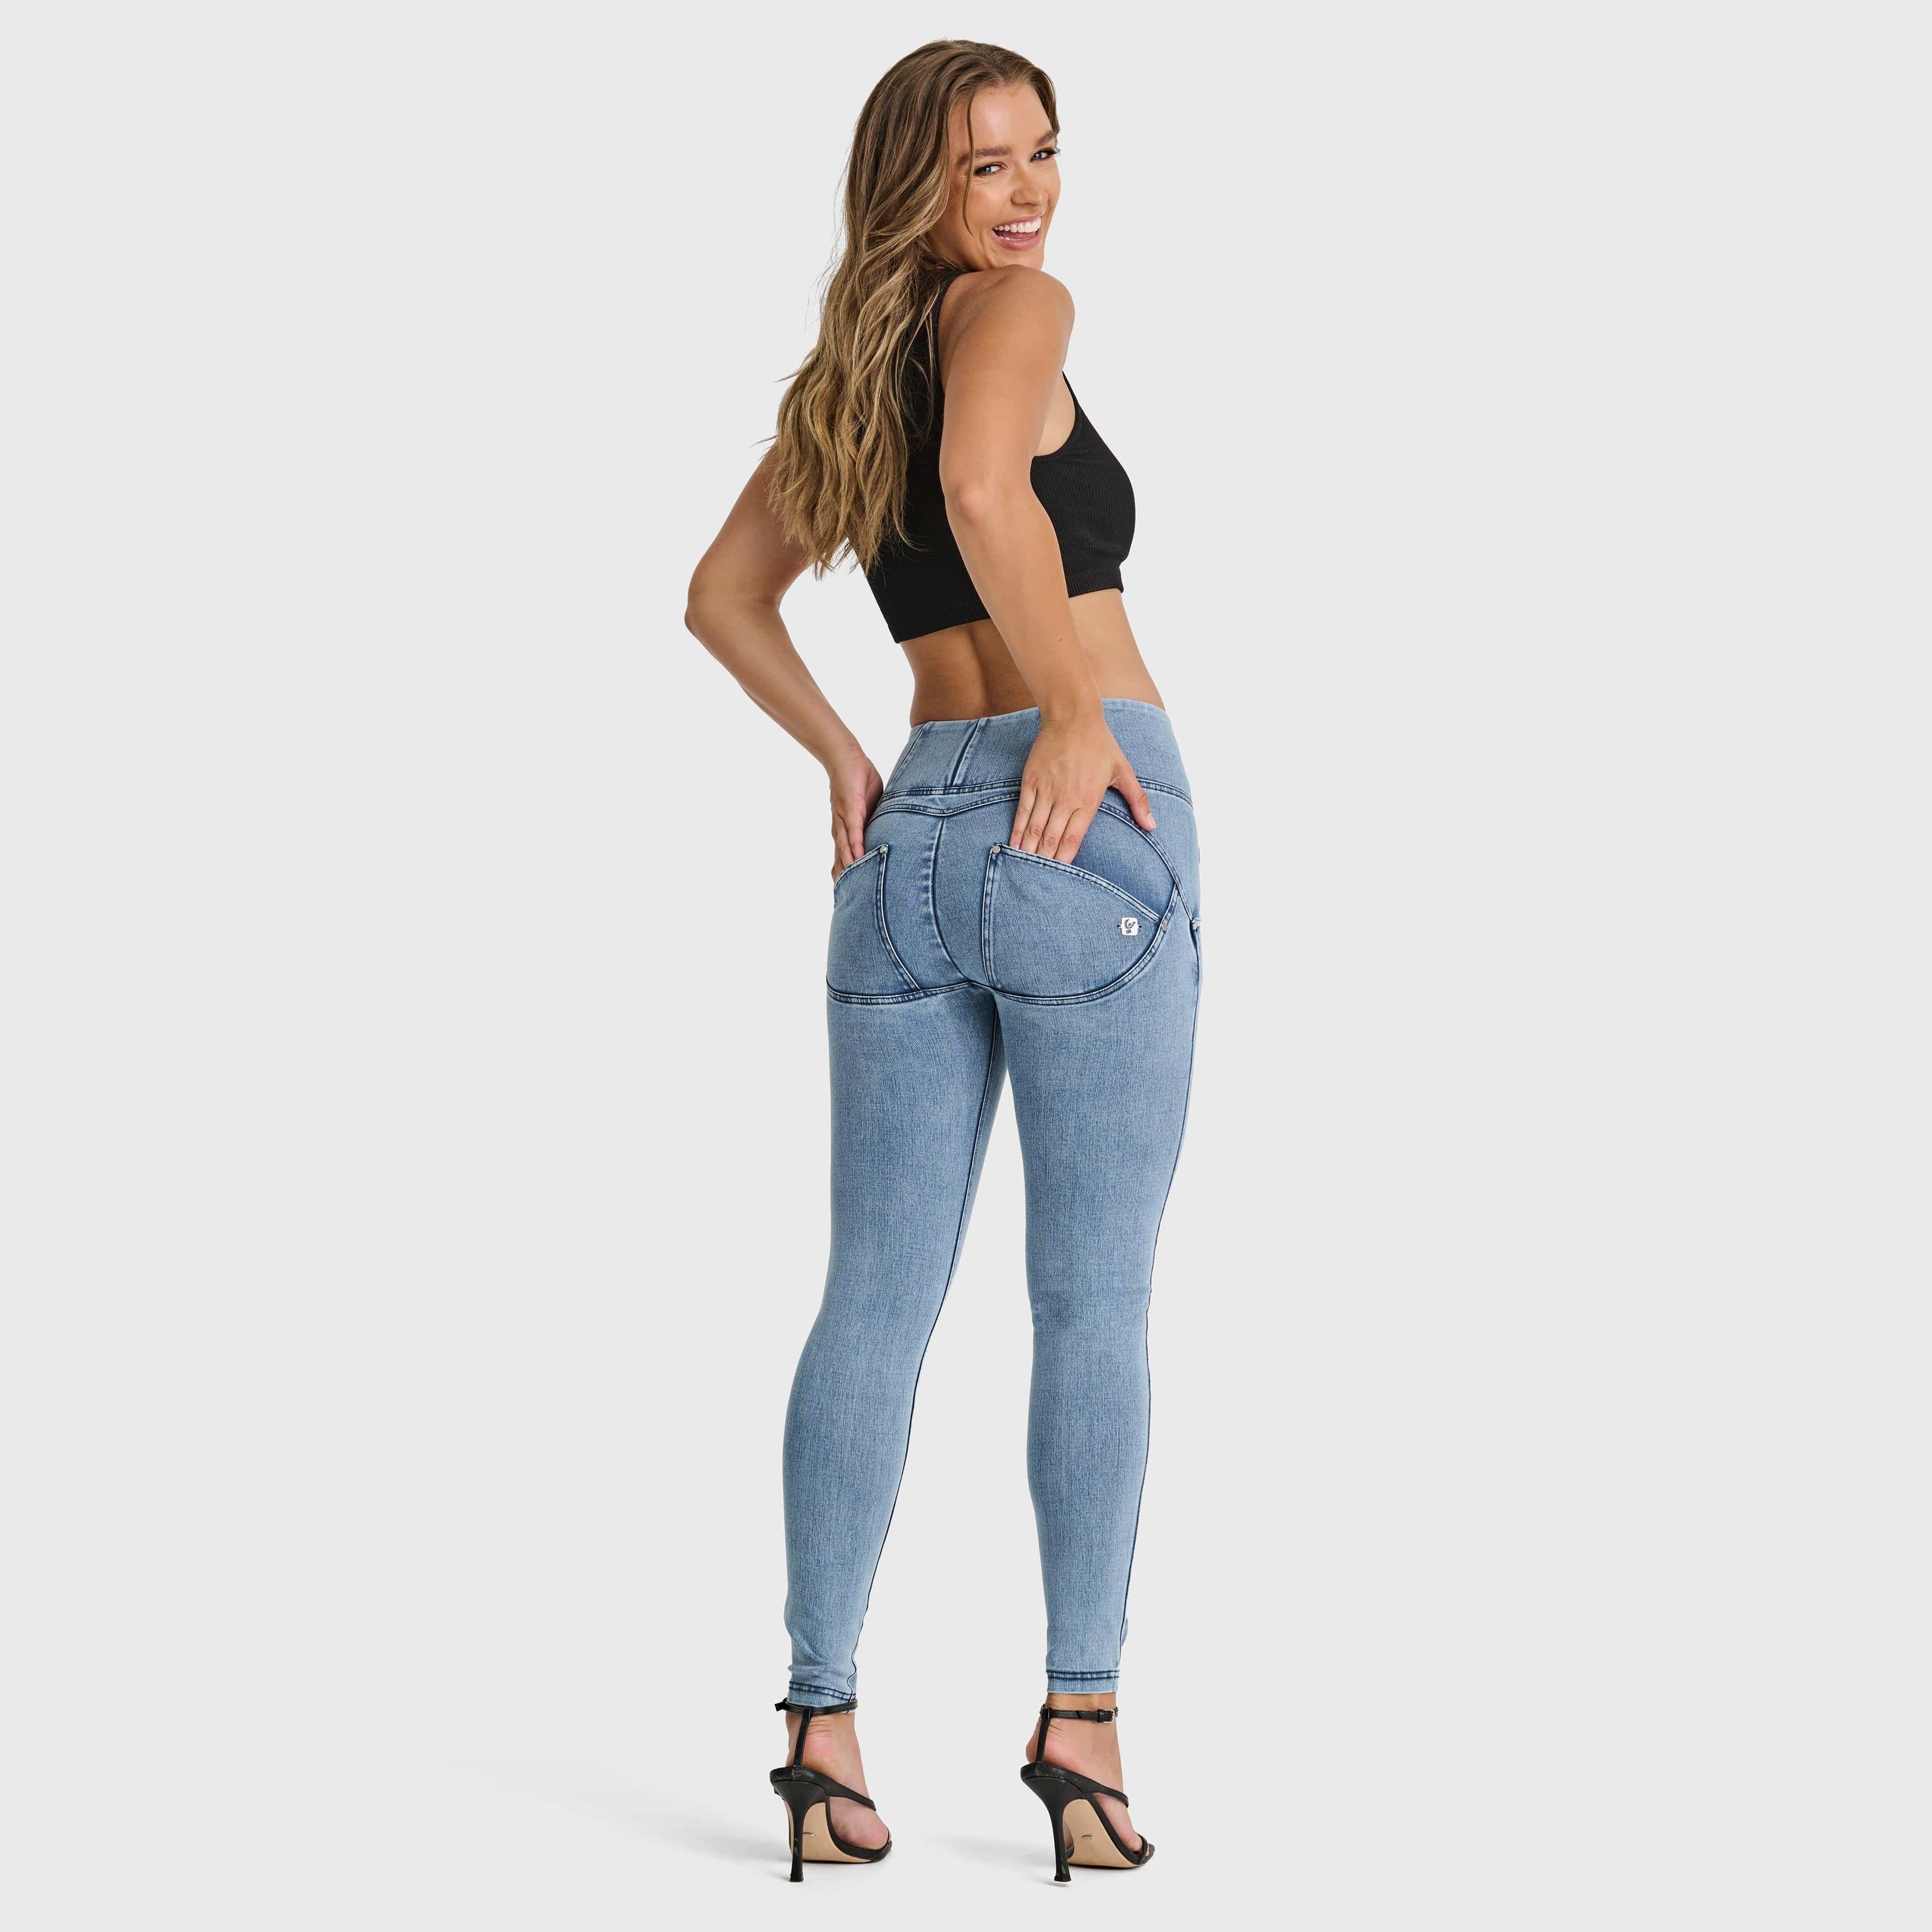 WR.UP® Snug Distressed Jeans - High Waisted - Full Length - Light Blue + Blue Stitching 3